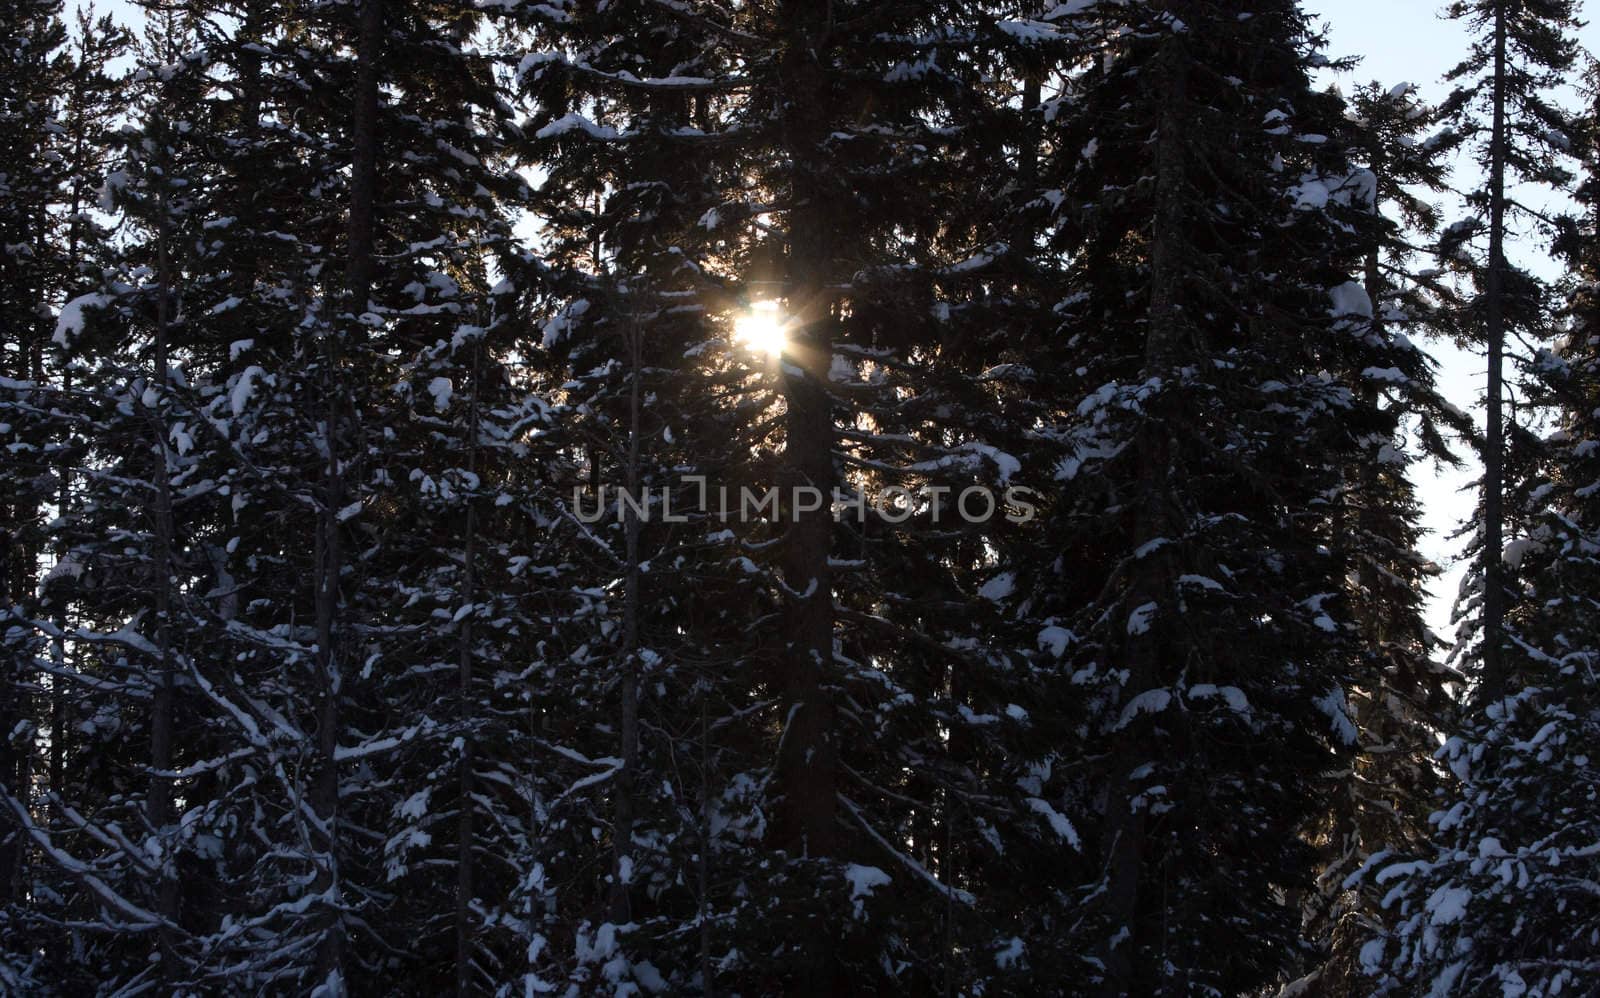 Sunliight Through the Trees.  Photo taken in the Mount Hood National Forest, OR.